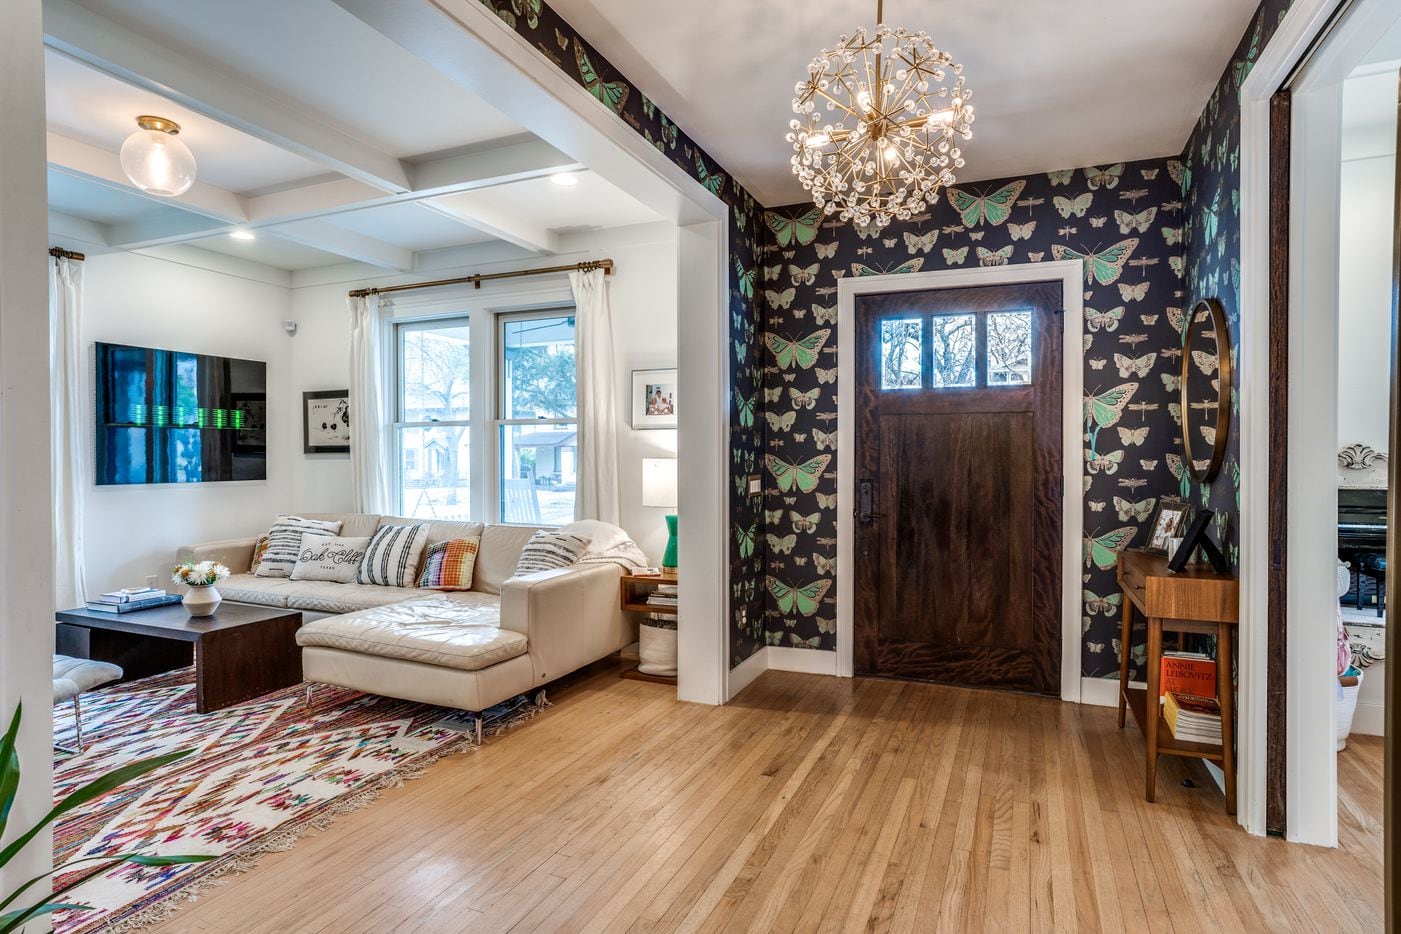 Take a look at the home at 308 N. Montclair Ave. in Dallas.